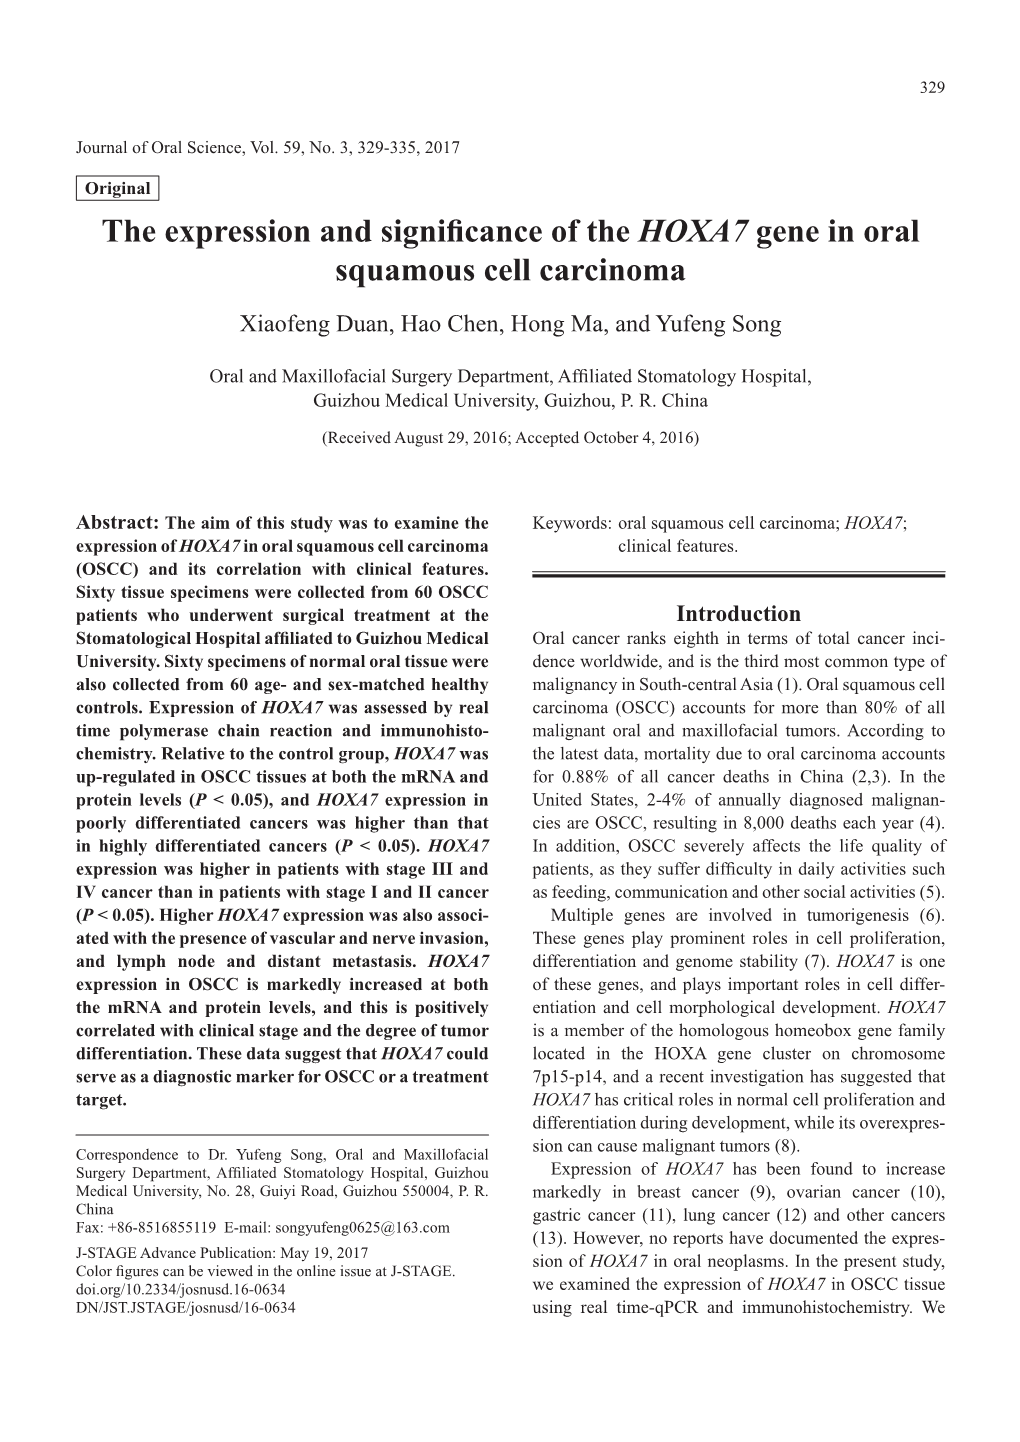 The Expression and Significance of the HOXA7 Gene in Oral Squamous Cell Carcinoma Xiaofeng Duan, Hao Chen, Hong Ma, and Yufeng Song